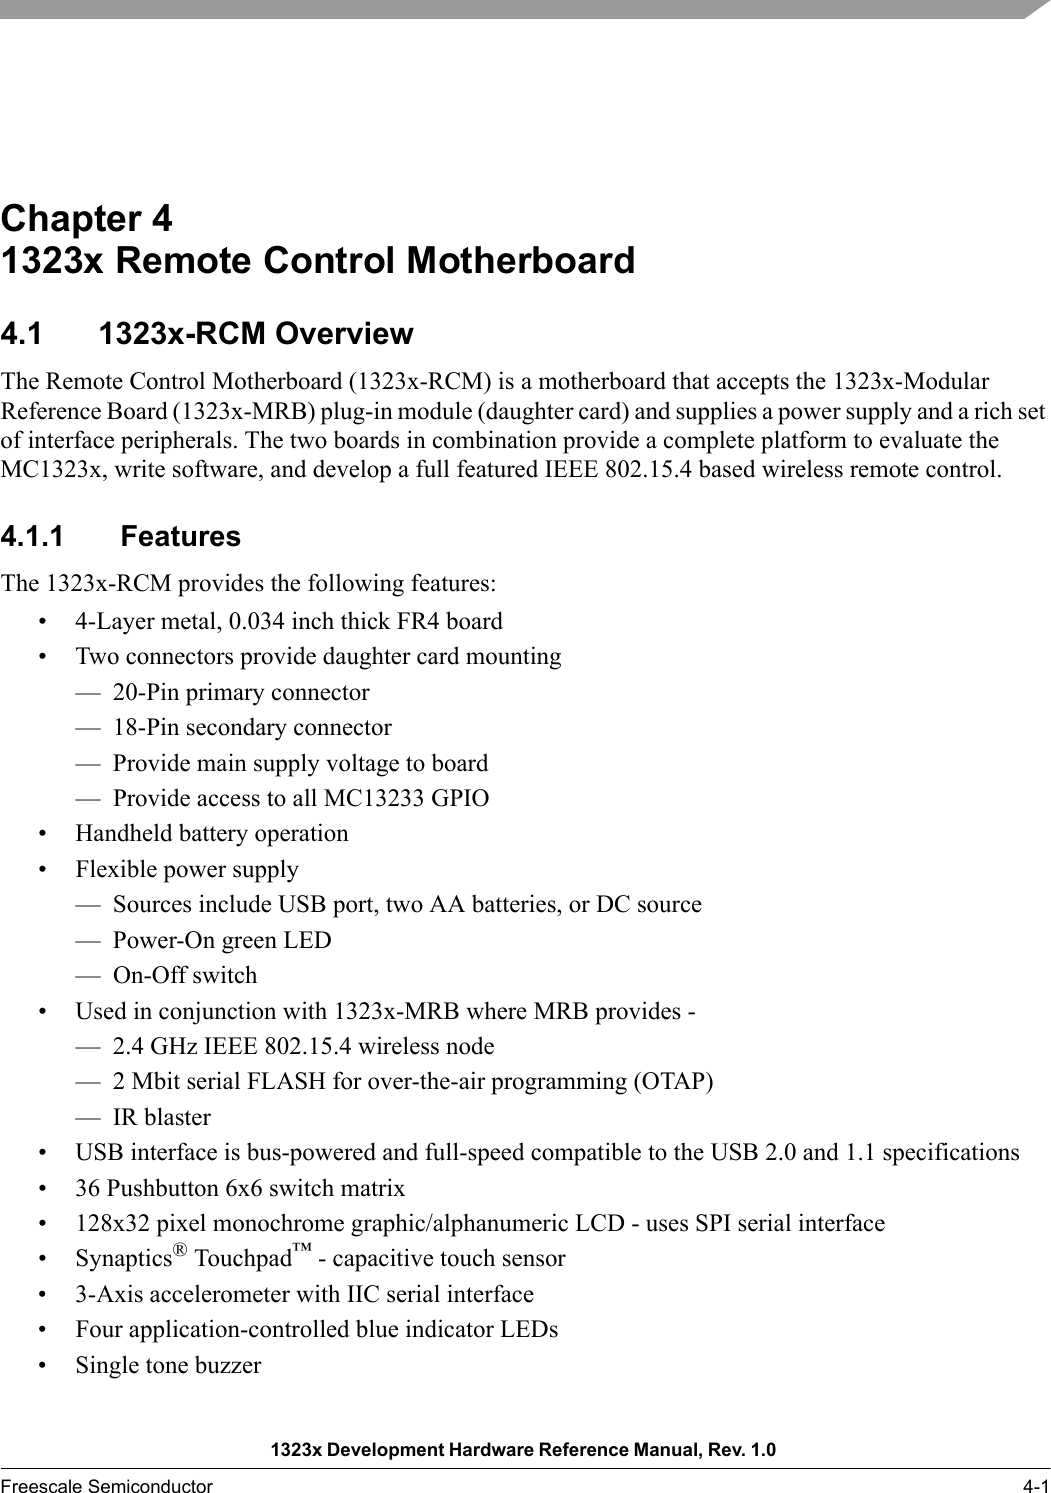 1323x Development Hardware Reference Manual, Rev. 1.0 Freescale Semiconductor 4-1Chapter 4  1323x Remote Control Motherboard4.1 1323x-RCM OverviewThe Remote Control Motherboard (1323x-RCM) is a motherboard that accepts the 1323x-Modular Reference Board (1323x-MRB) plug-in module (daughter card) and supplies a power supply and a rich set of interface peripherals. The two boards in combination provide a complete platform to evaluate the MC1323x, write software, and develop a full featured IEEE 802.15.4 based wireless remote control. 4.1.1 FeaturesThe 1323x-RCM provides the following features:• 4-Layer metal, 0.034 inch thick FR4 board• Two connectors provide daughter card mounting— 20-Pin primary connector— 18-Pin secondary connector— Provide main supply voltage to board— Provide access to all MC13233 GPIO• Handheld battery operation• Flexible power supply— Sources include USB port, two AA batteries, or DC source— Power-On green LED—On-Off switch• Used in conjunction with 1323x-MRB where MRB provides -— 2.4 GHz IEEE 802.15.4 wireless node— 2 Mbit serial FLASH for over-the-air programming (OTAP)— IR blaster• USB interface is bus-powered and full-speed compatible to the USB 2.0 and 1.1 specifications• 36 Pushbutton 6x6 switch matrix• 128x32 pixel monochrome graphic/alphanumeric LCD - uses SPI serial interface• Synaptics® Touchpad™ - capacitive touch sensor• 3-Axis accelerometer with IIC serial interface• Four application-controlled blue indicator LEDs• Single tone buzzer